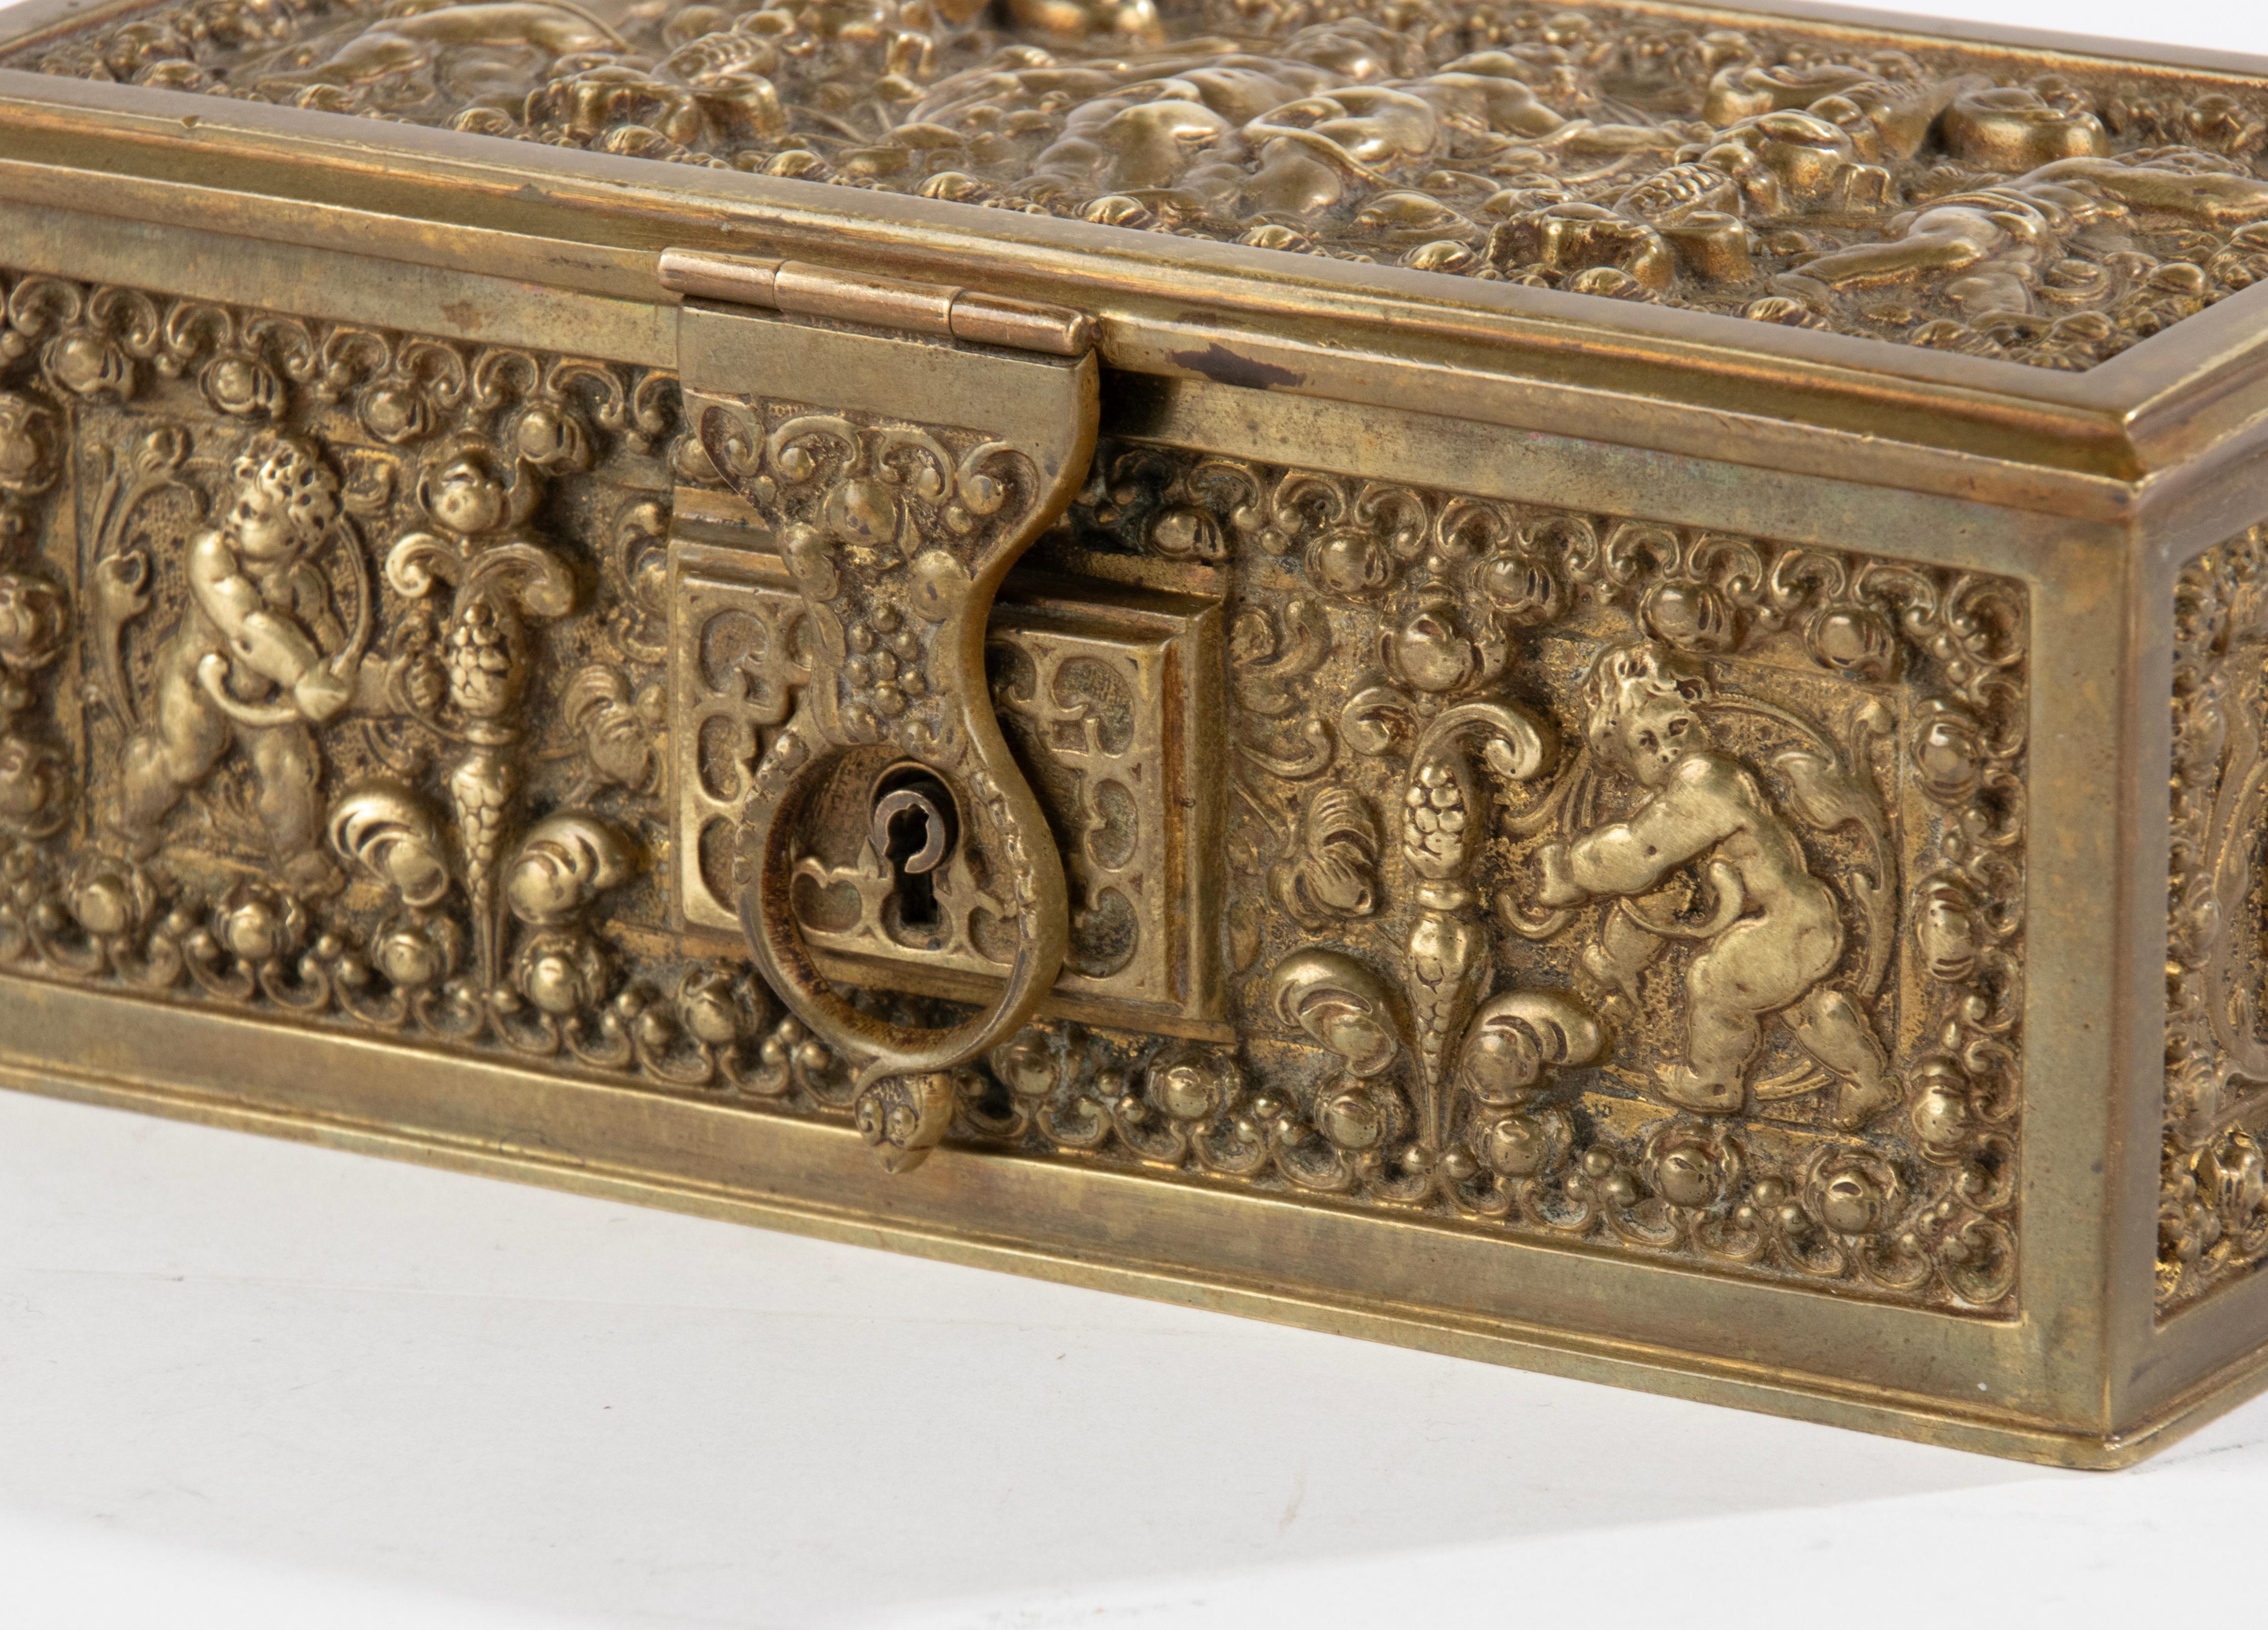 A beautiful bronze box, decorated in renaissance style with putti and decorative ornaments. 
The box is in good condition, key is missing. Beautiful colour and patina. 

Dimensions: 7 (h) x 17 x 9 cm
Free shipping worldwide